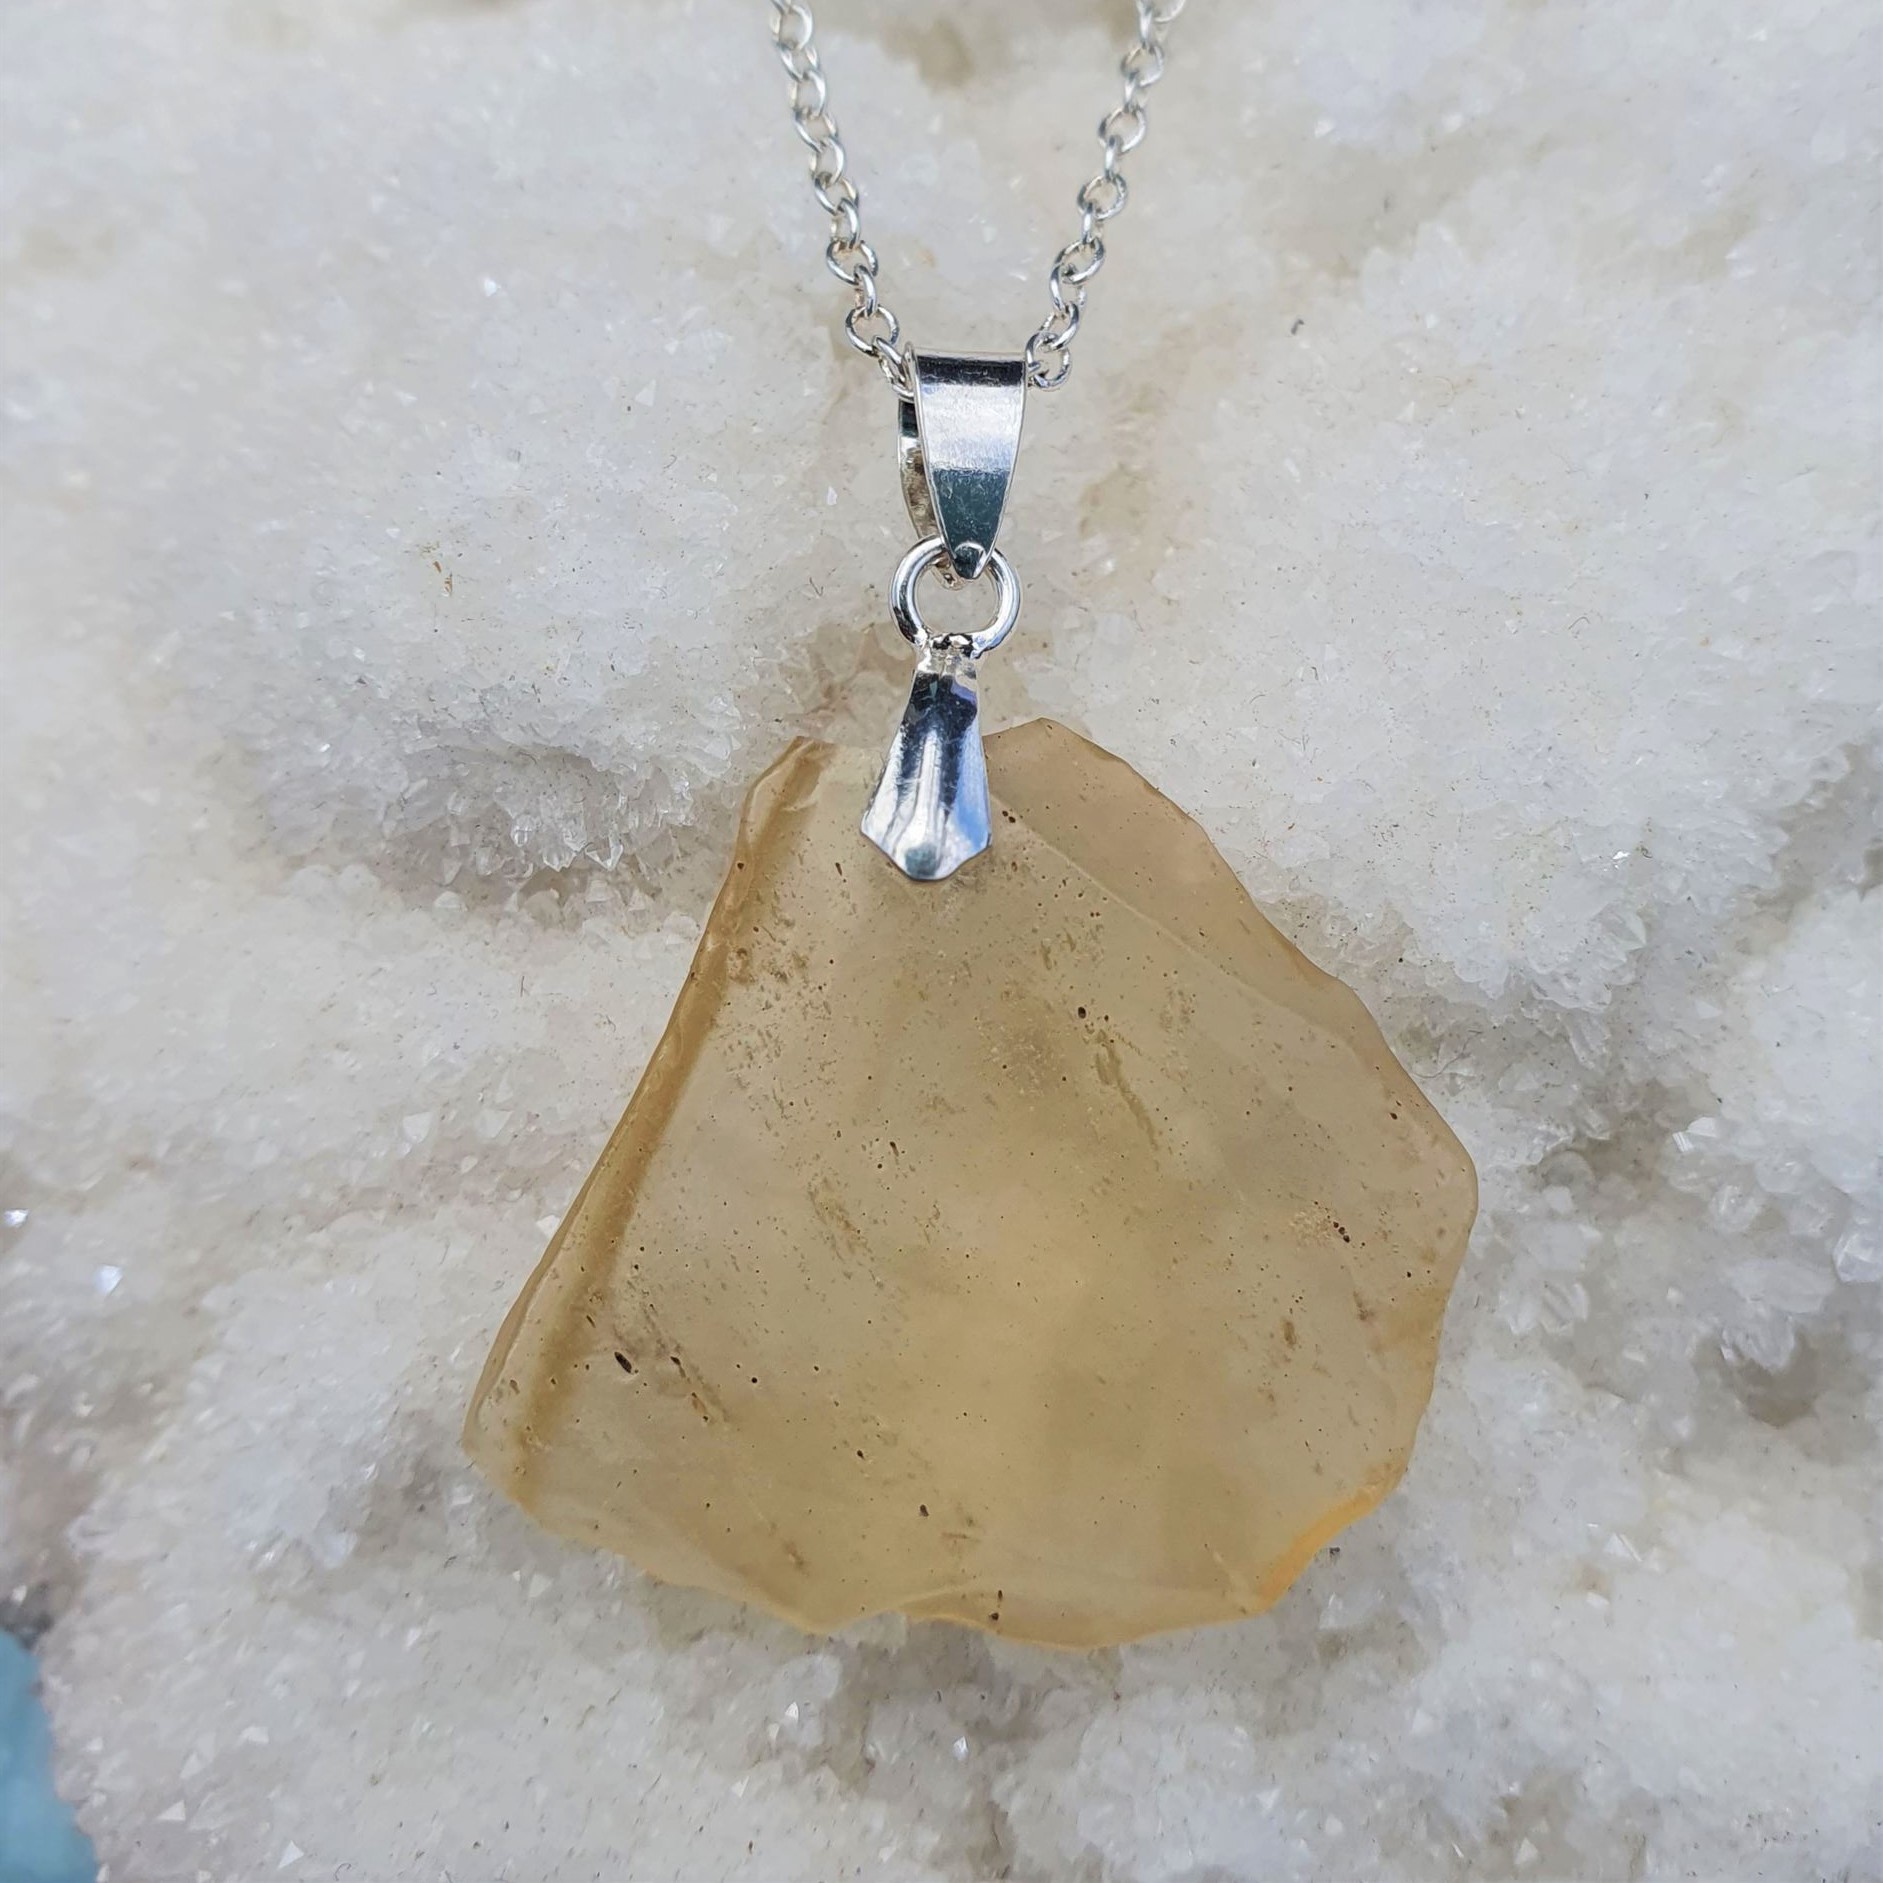 Libyan Desert Glass Pendant – Confidence and Potential 3.47 grams ...